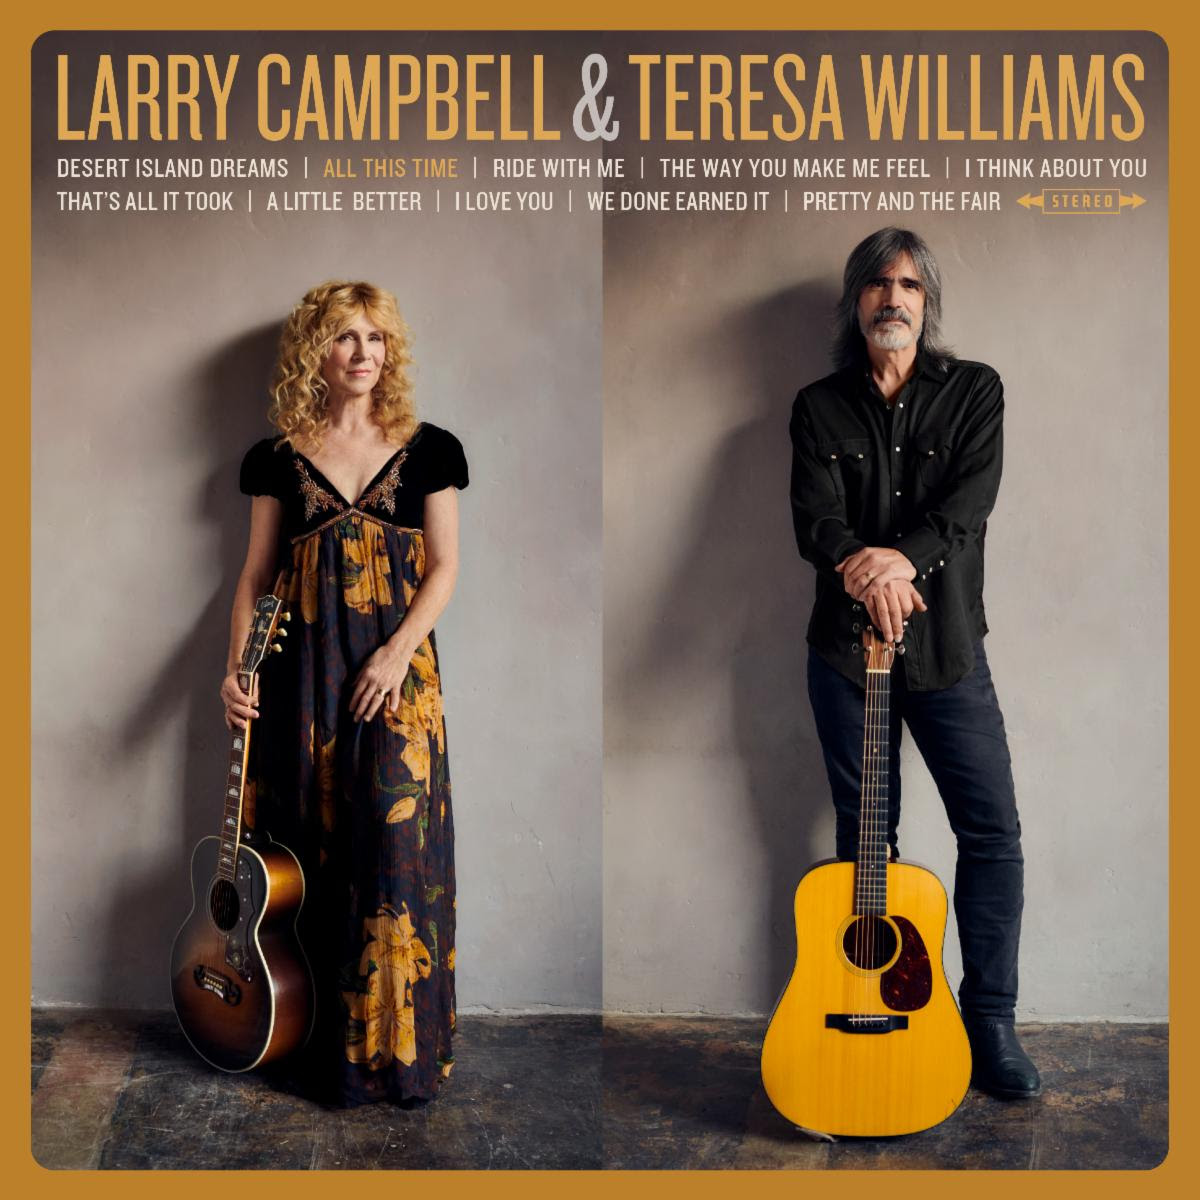 ﻿Larry Campbell & Teresa Williams Honor Their Enduring Love on New Original Song “The Way You Make Me Feel”